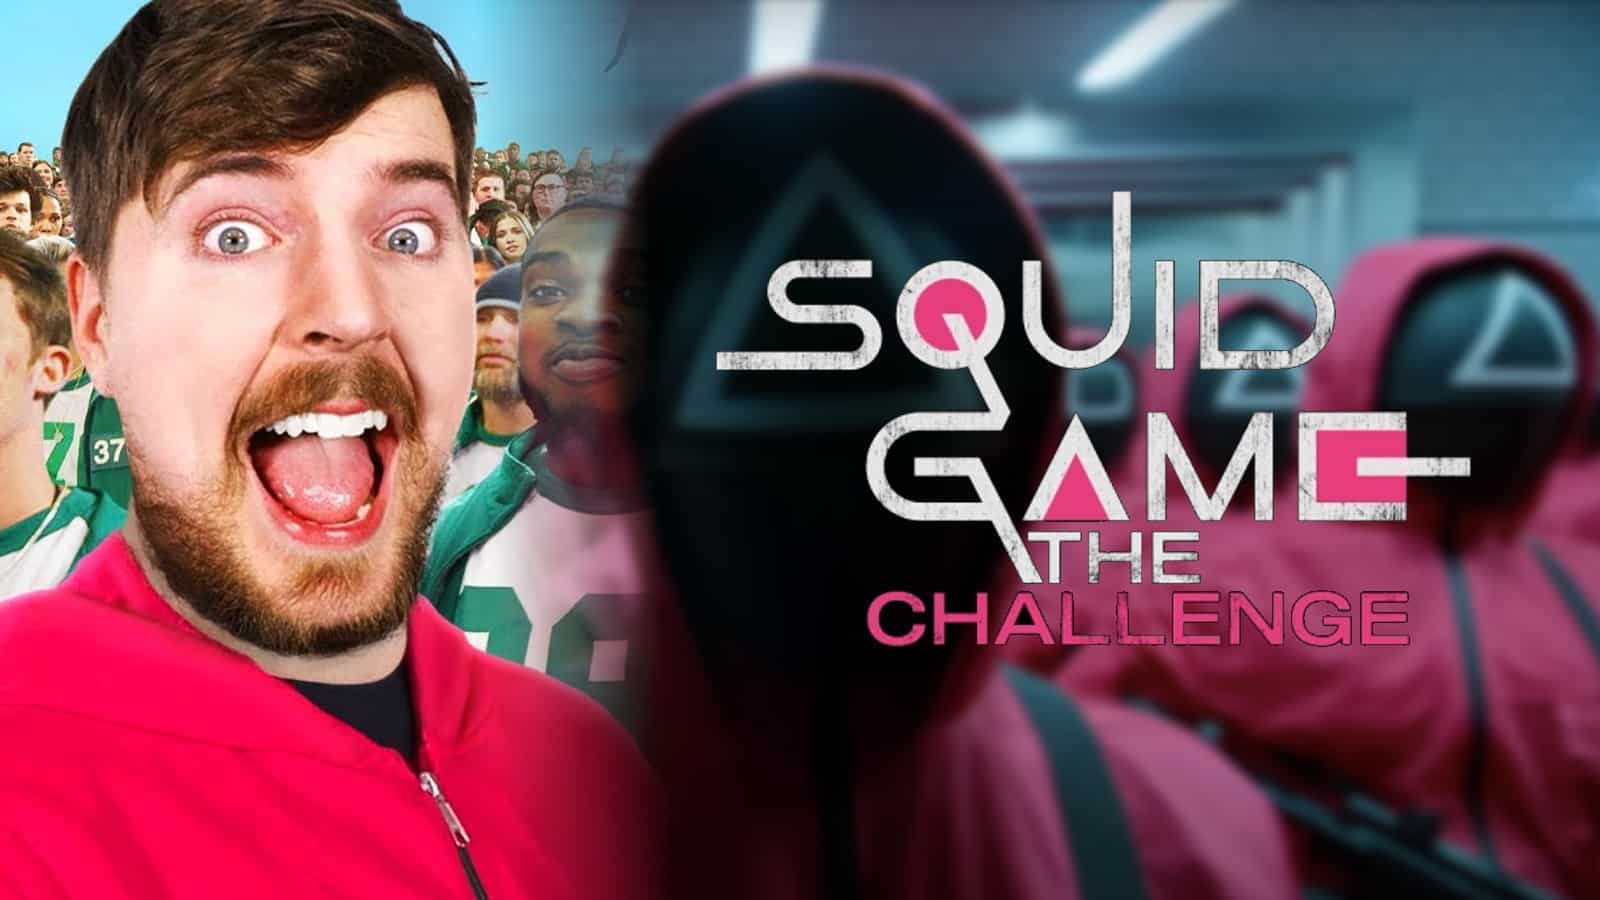 Netflix takes a page out of Mr Beast's book with real life Squid